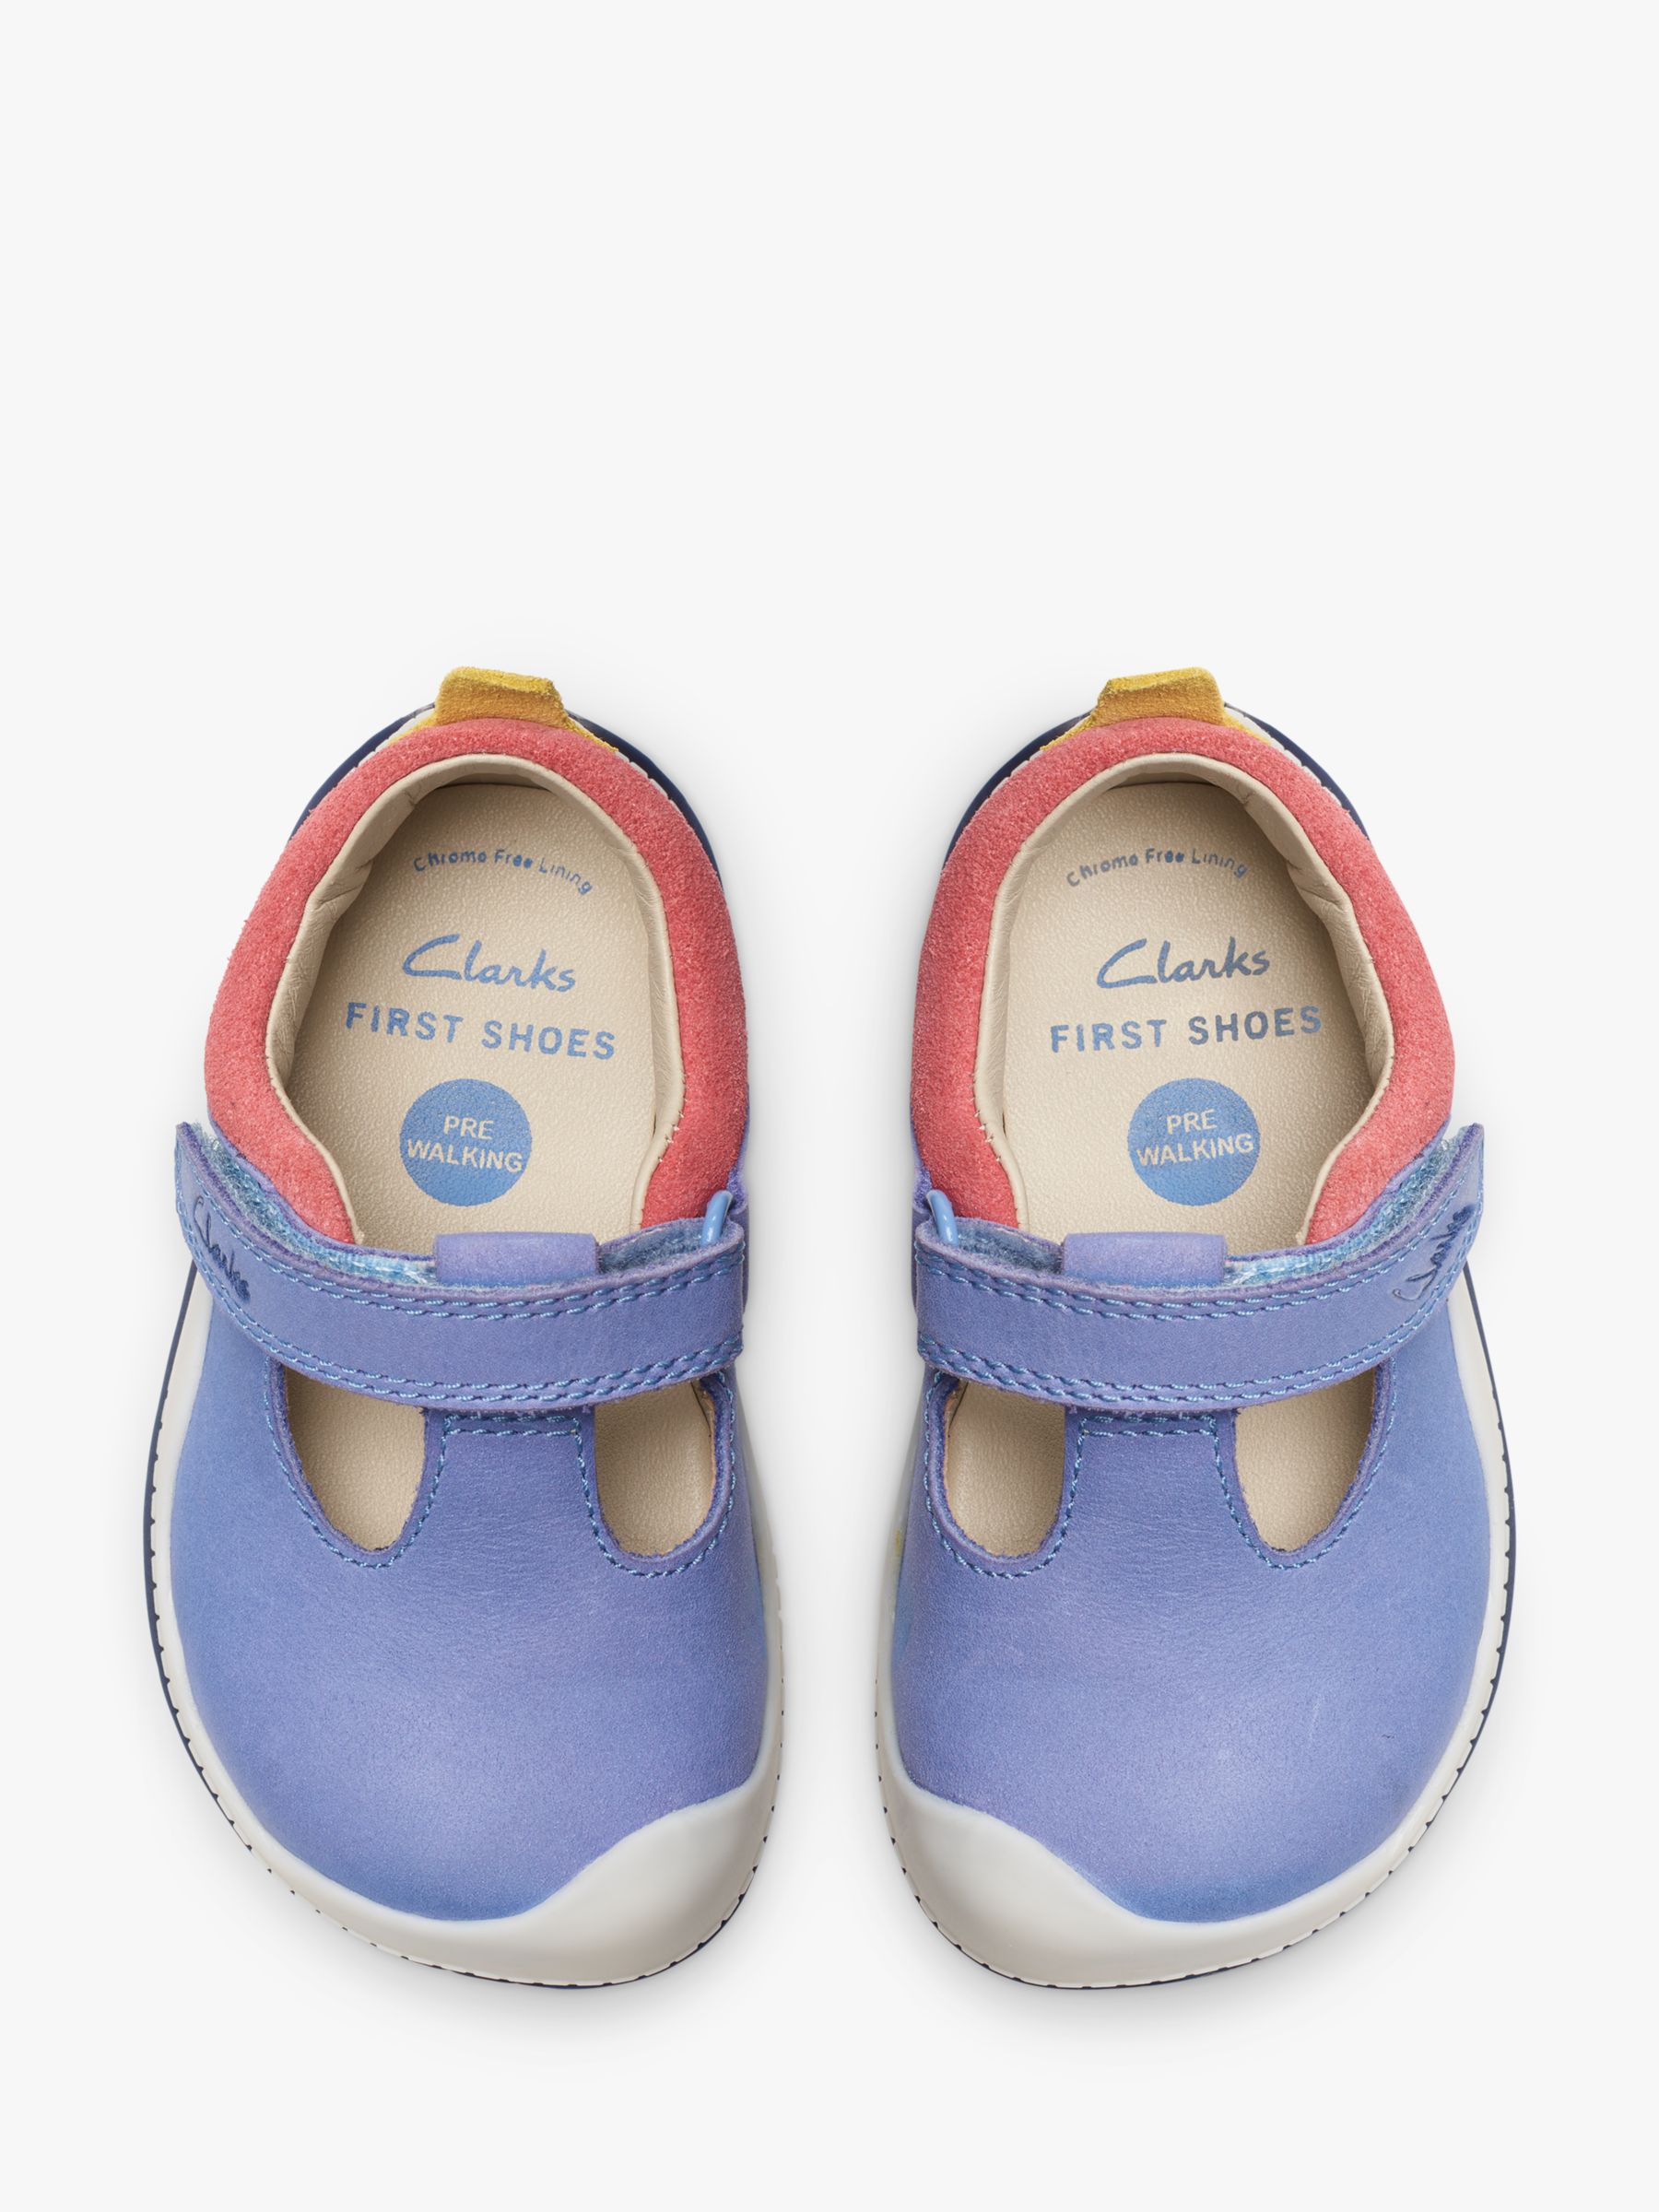 Clarks Baby Roller Bright T-Bar First Shoes, Blue, 3.5F Jnr